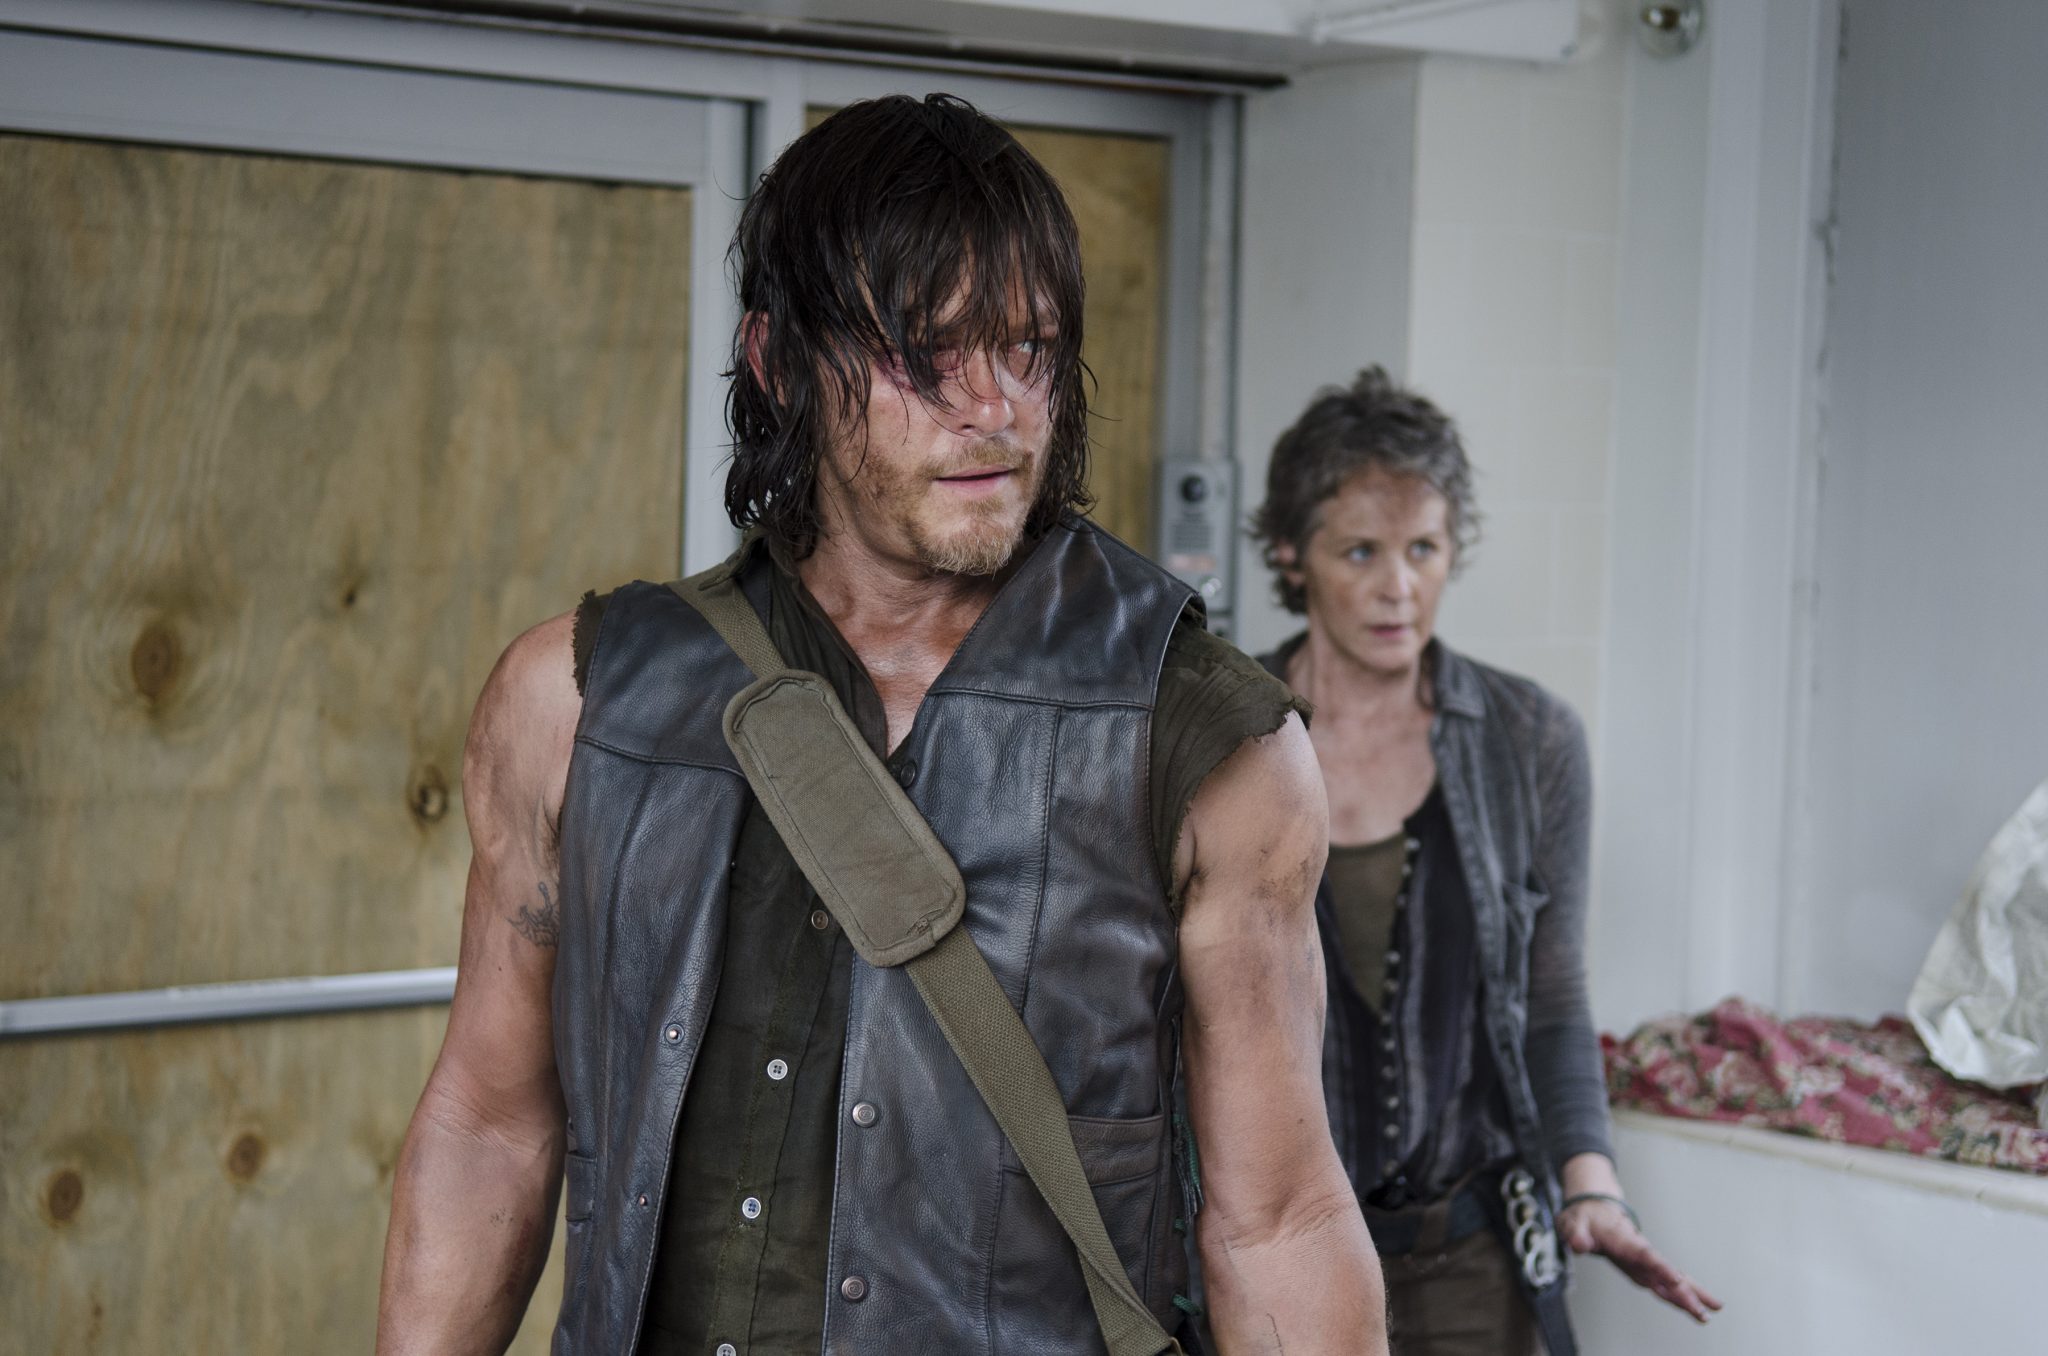 Walking Dead Daryl and Carol together again. Image by Gene Page/AMC